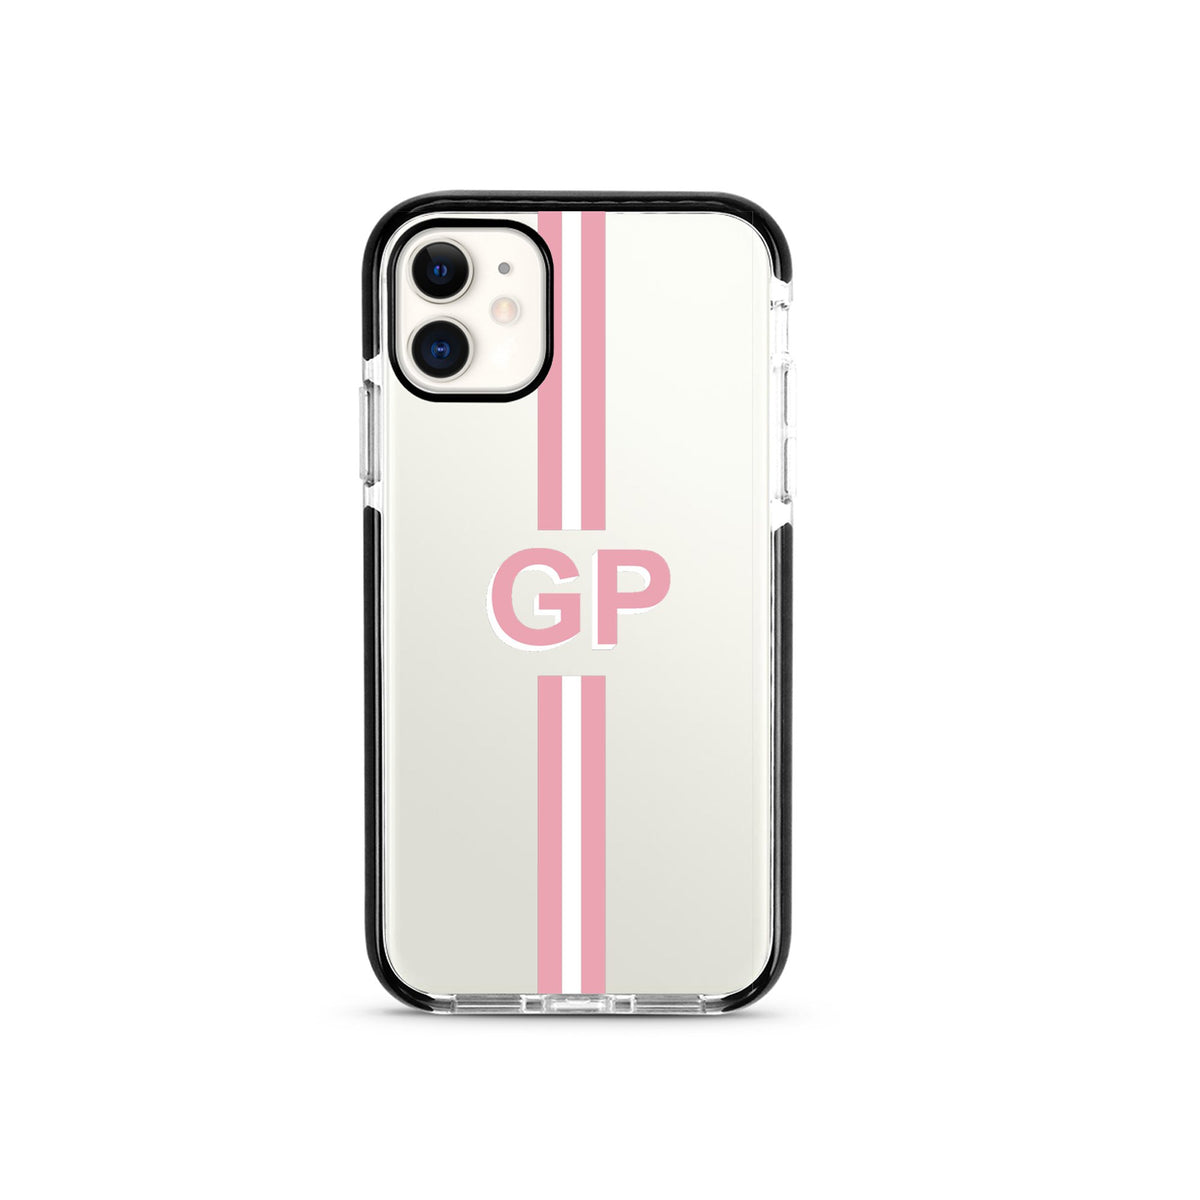 The Messy Corner Phone Cover Personalised Silicone iPhone Cover - Black Bumper with Stripes